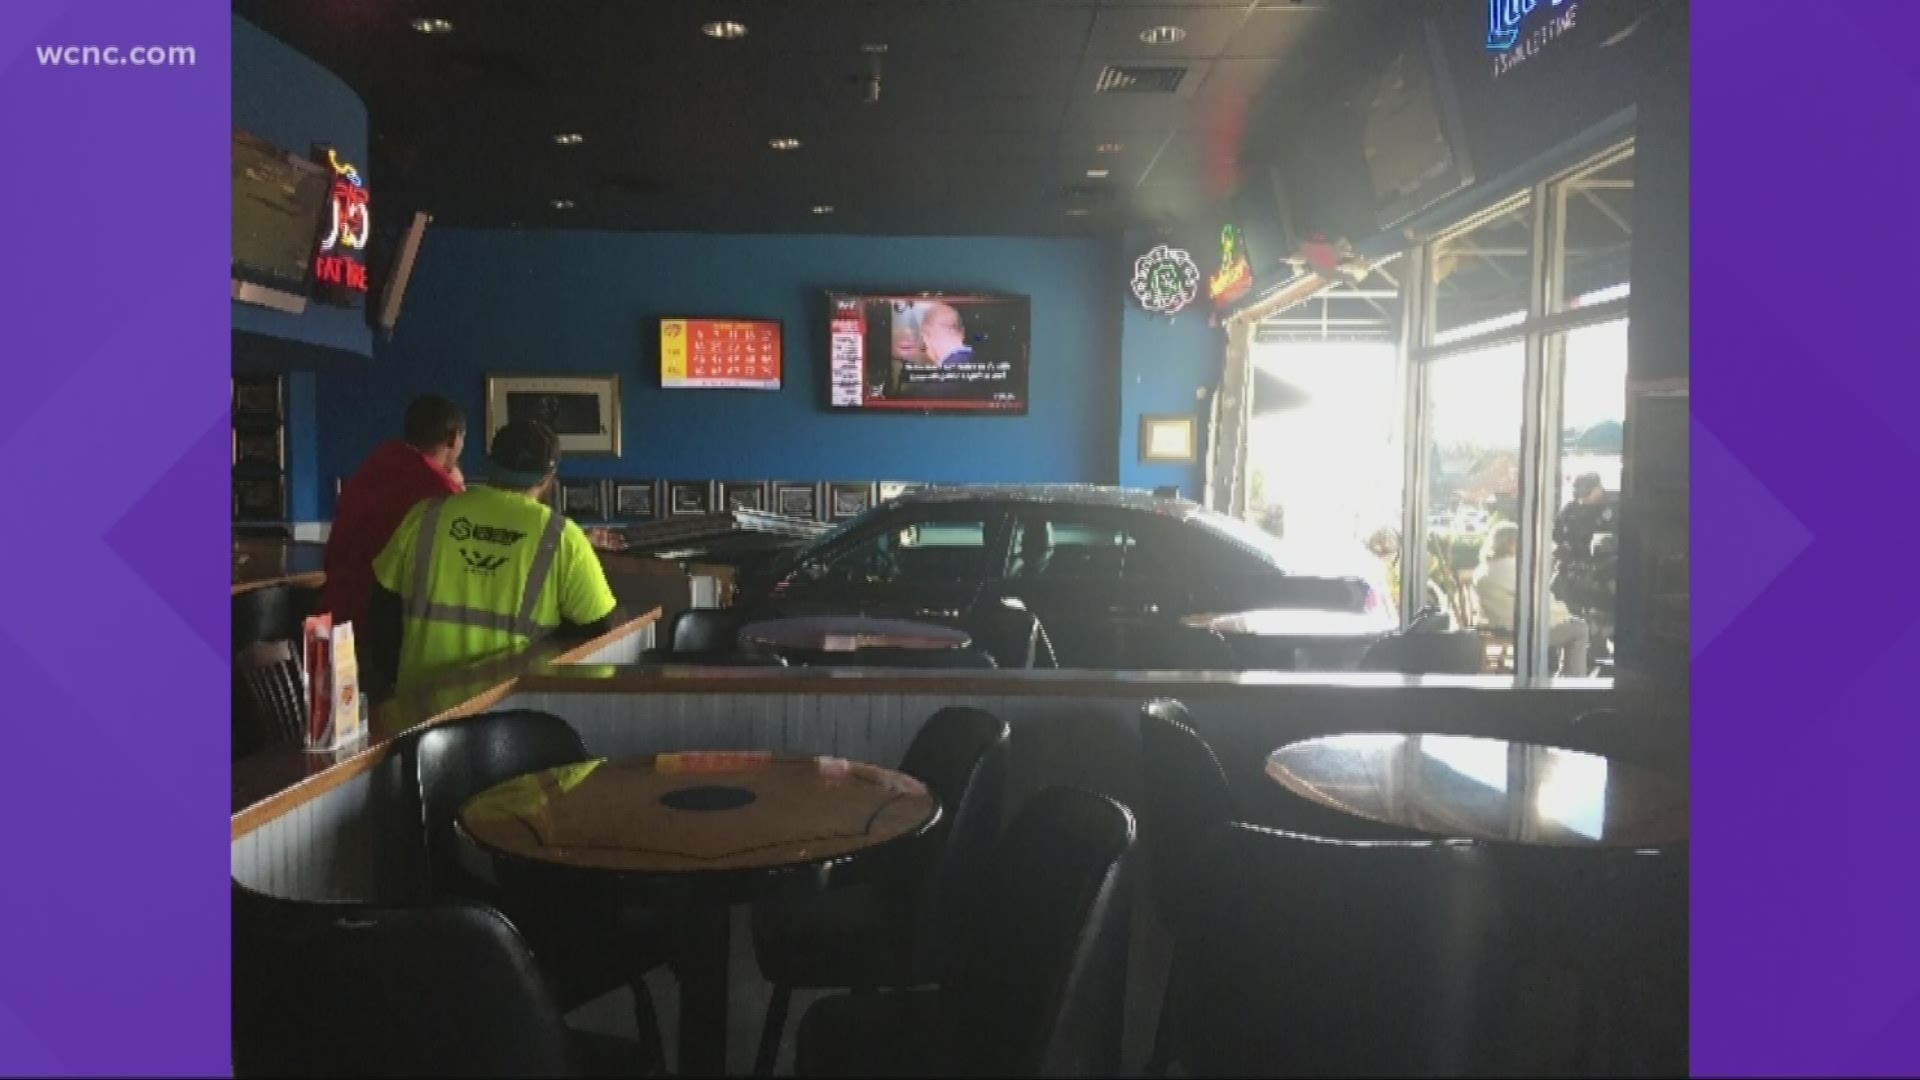 Nobody was injured, even though the car went all the way into the restaurant.